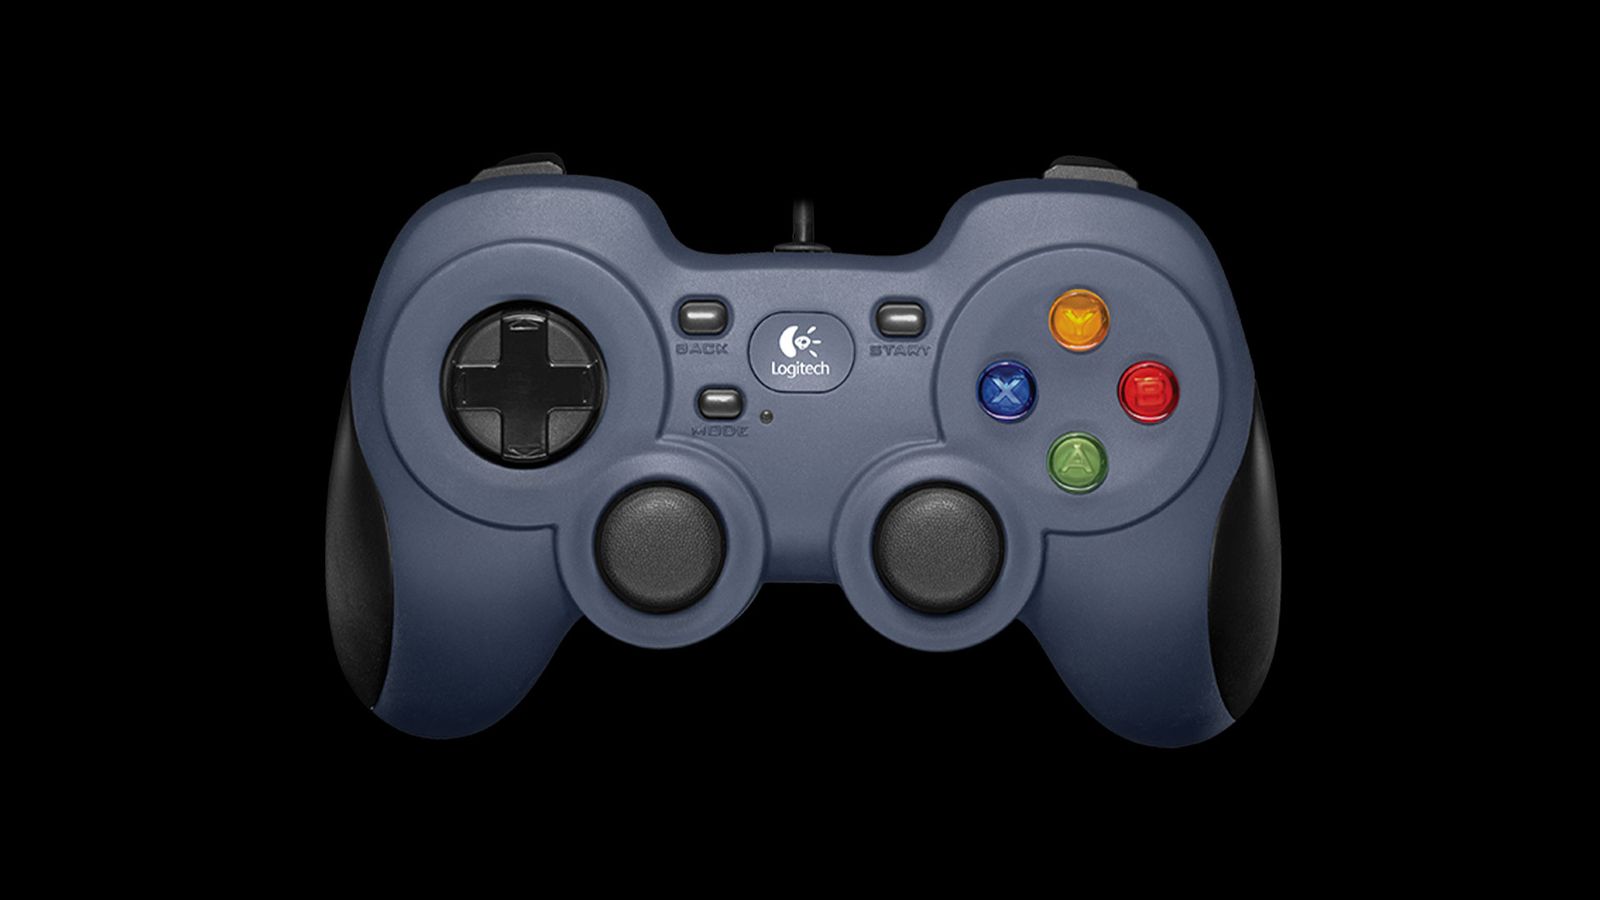 Logitech F310 product image of a retro-style grey-ish/blue controller with multicoloured buttons on the right side.